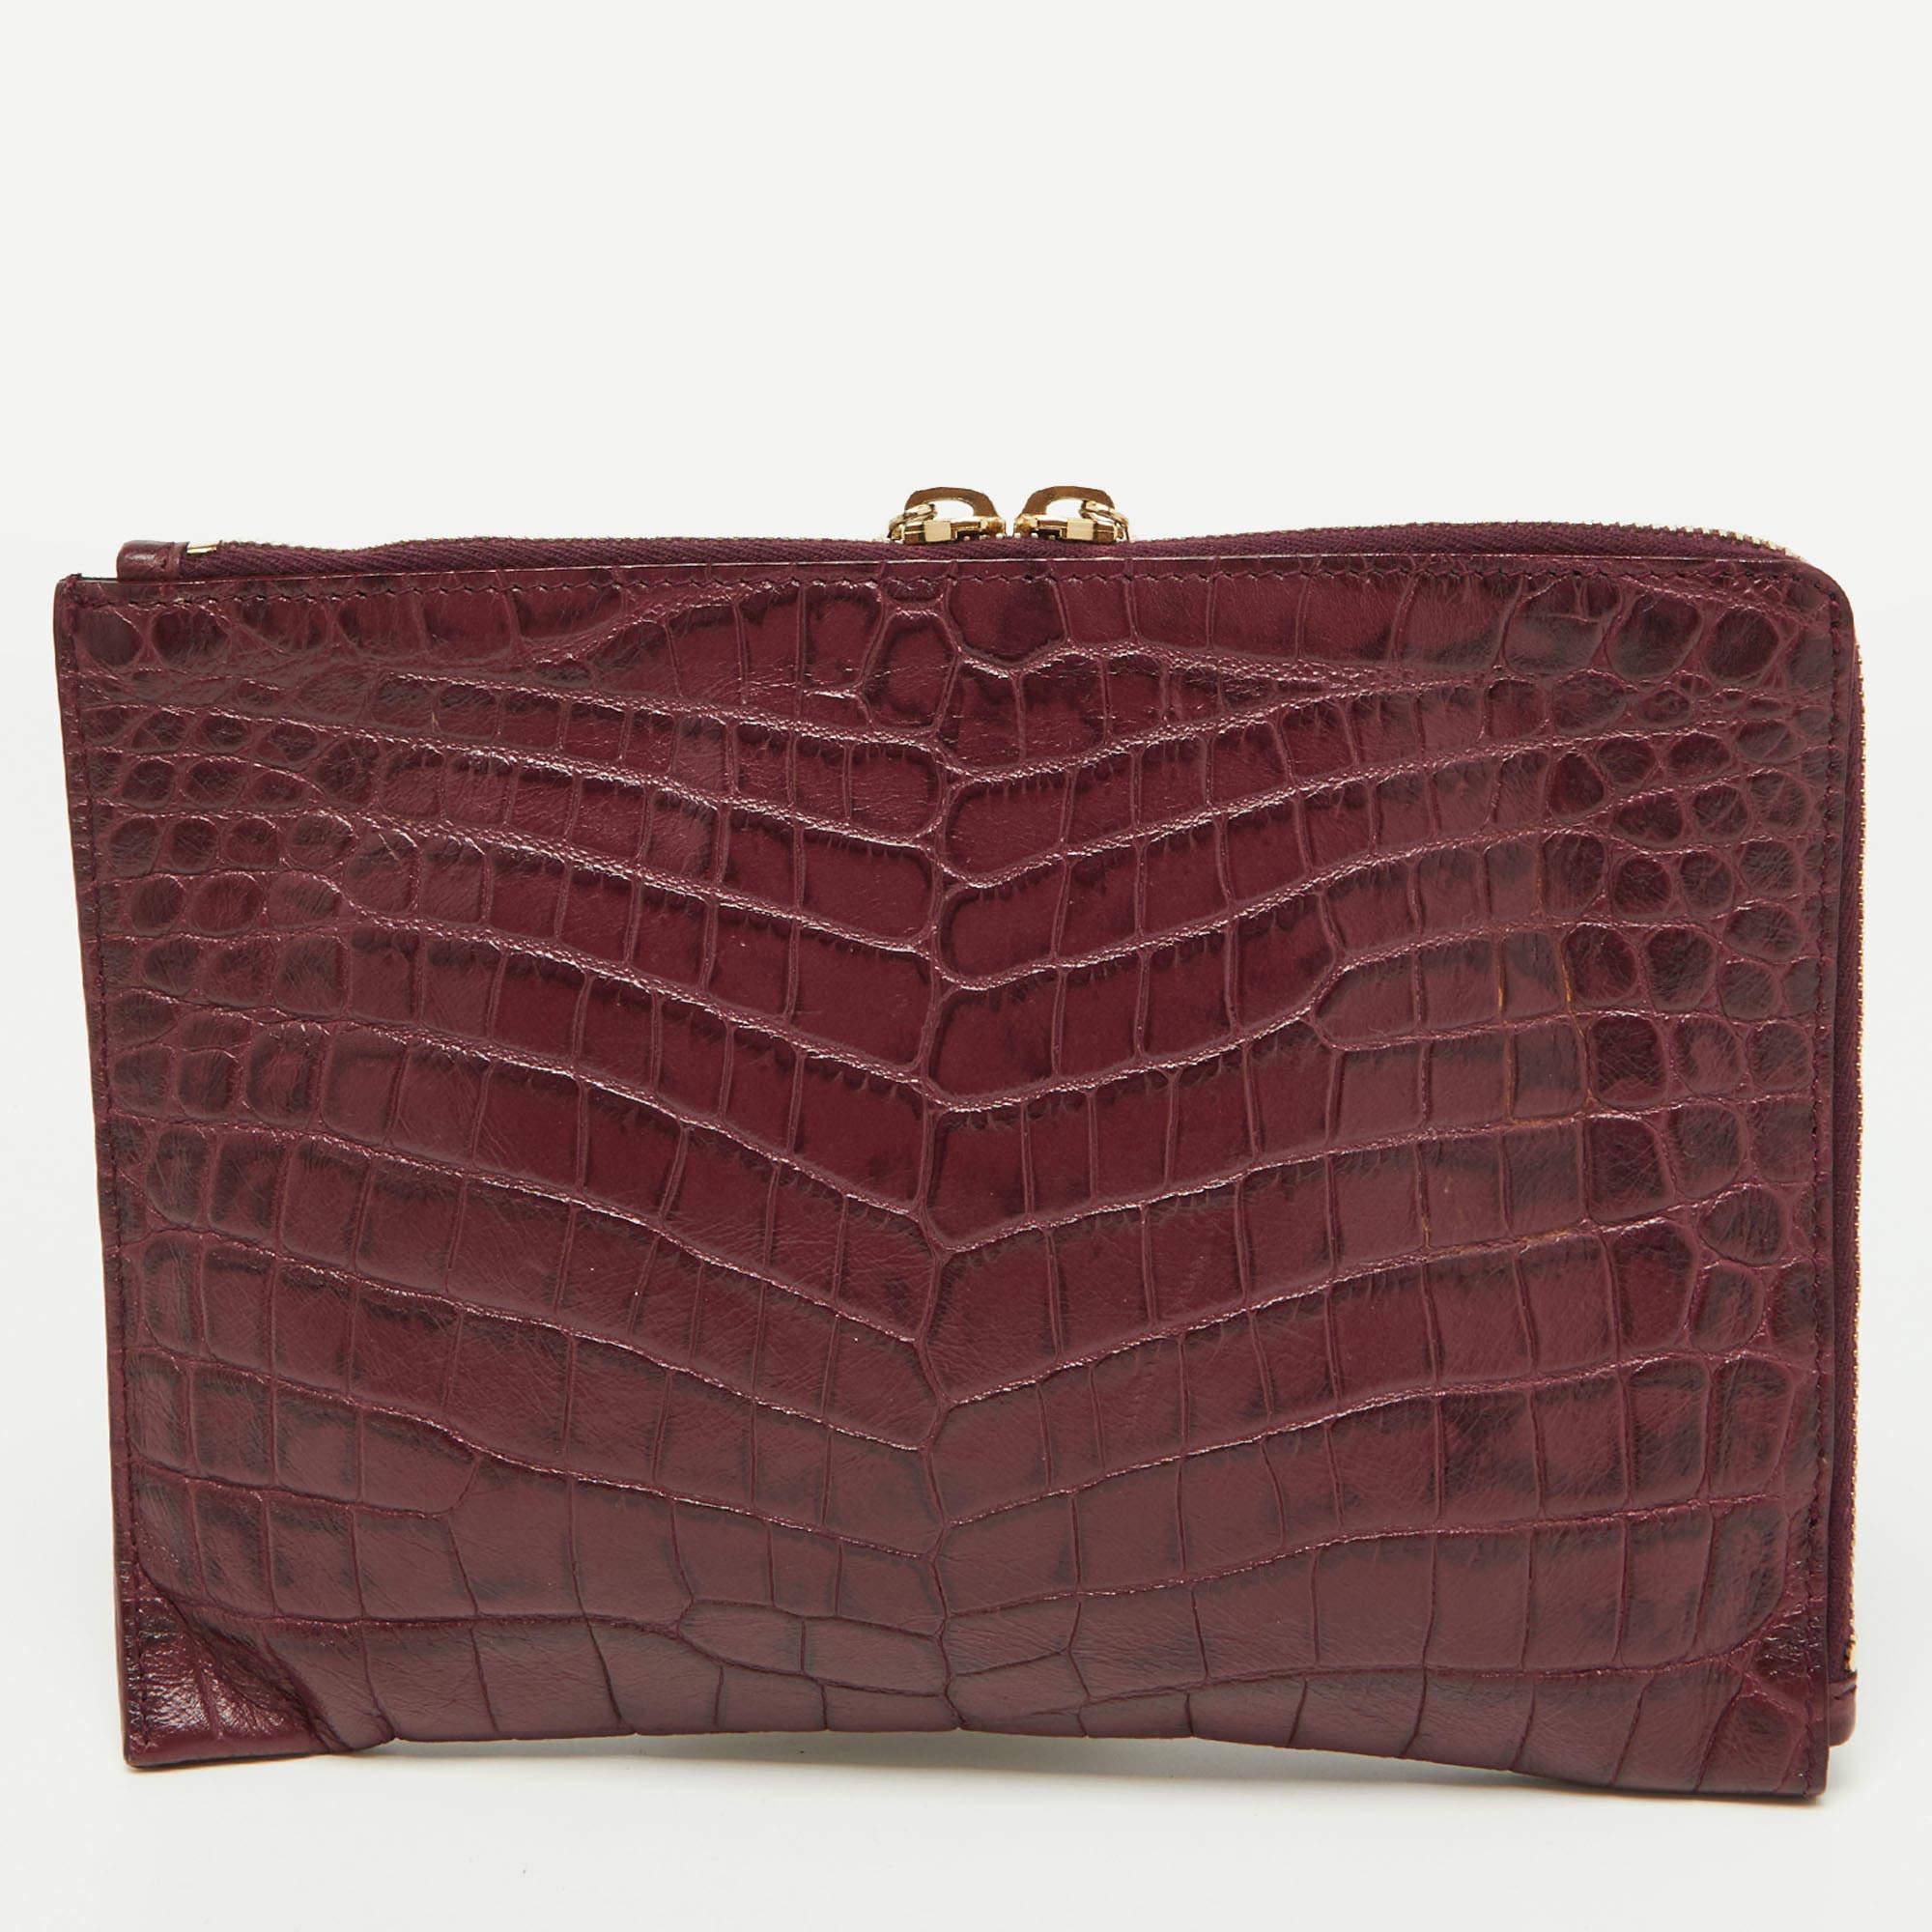 This pretty Balenciaga clutch is a stylish creation that is exceptionally well-made. This clutch is crafted from croc-embossed leather and accented with signature gold-tone studs, corner buckle detailing, and a front zip pocket. The interior is